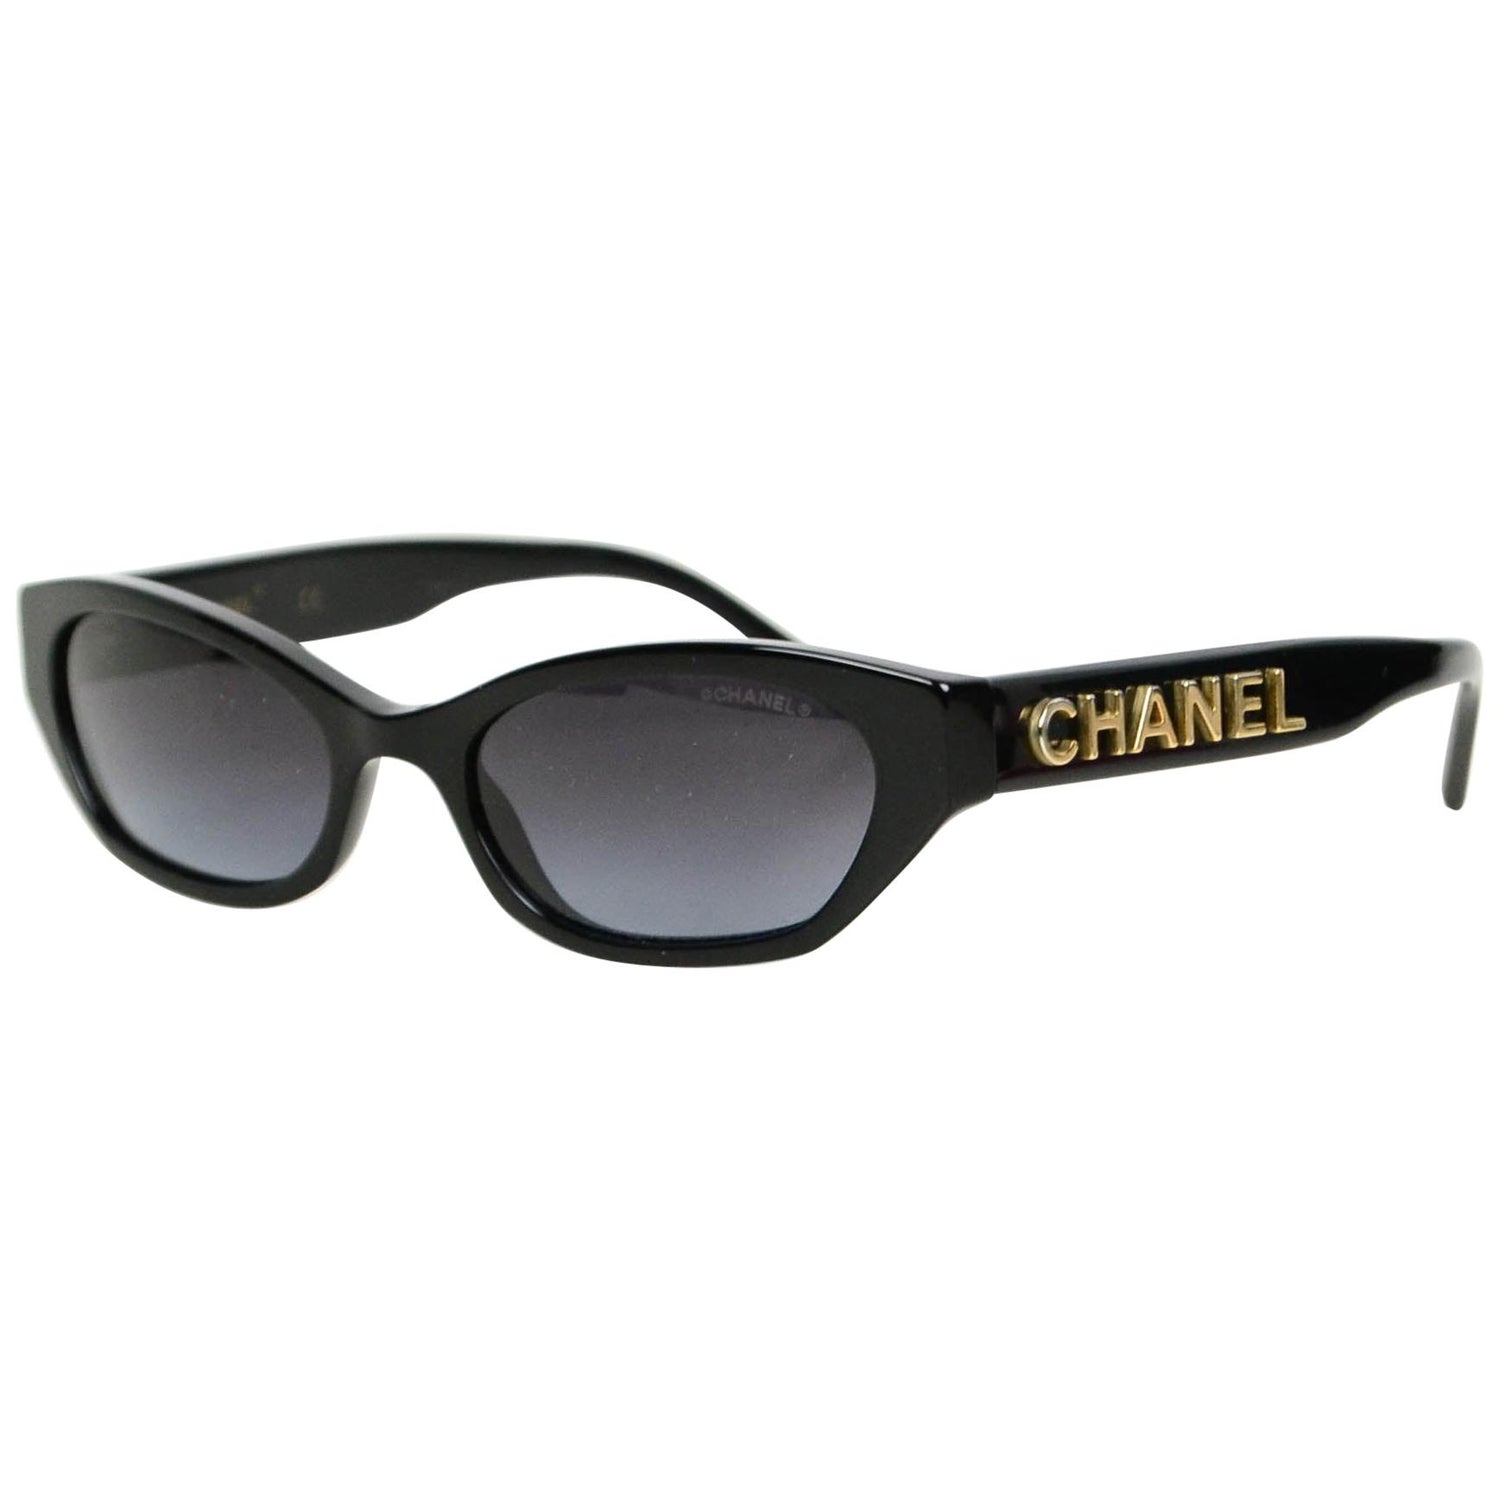 Chanel Rectangle Sunglasses - 4 For Sale on 1stDibs | chanel rectangle  sunglasses a71280 black, a71280 chanel sunglasses, chanel a71280 sunglasses